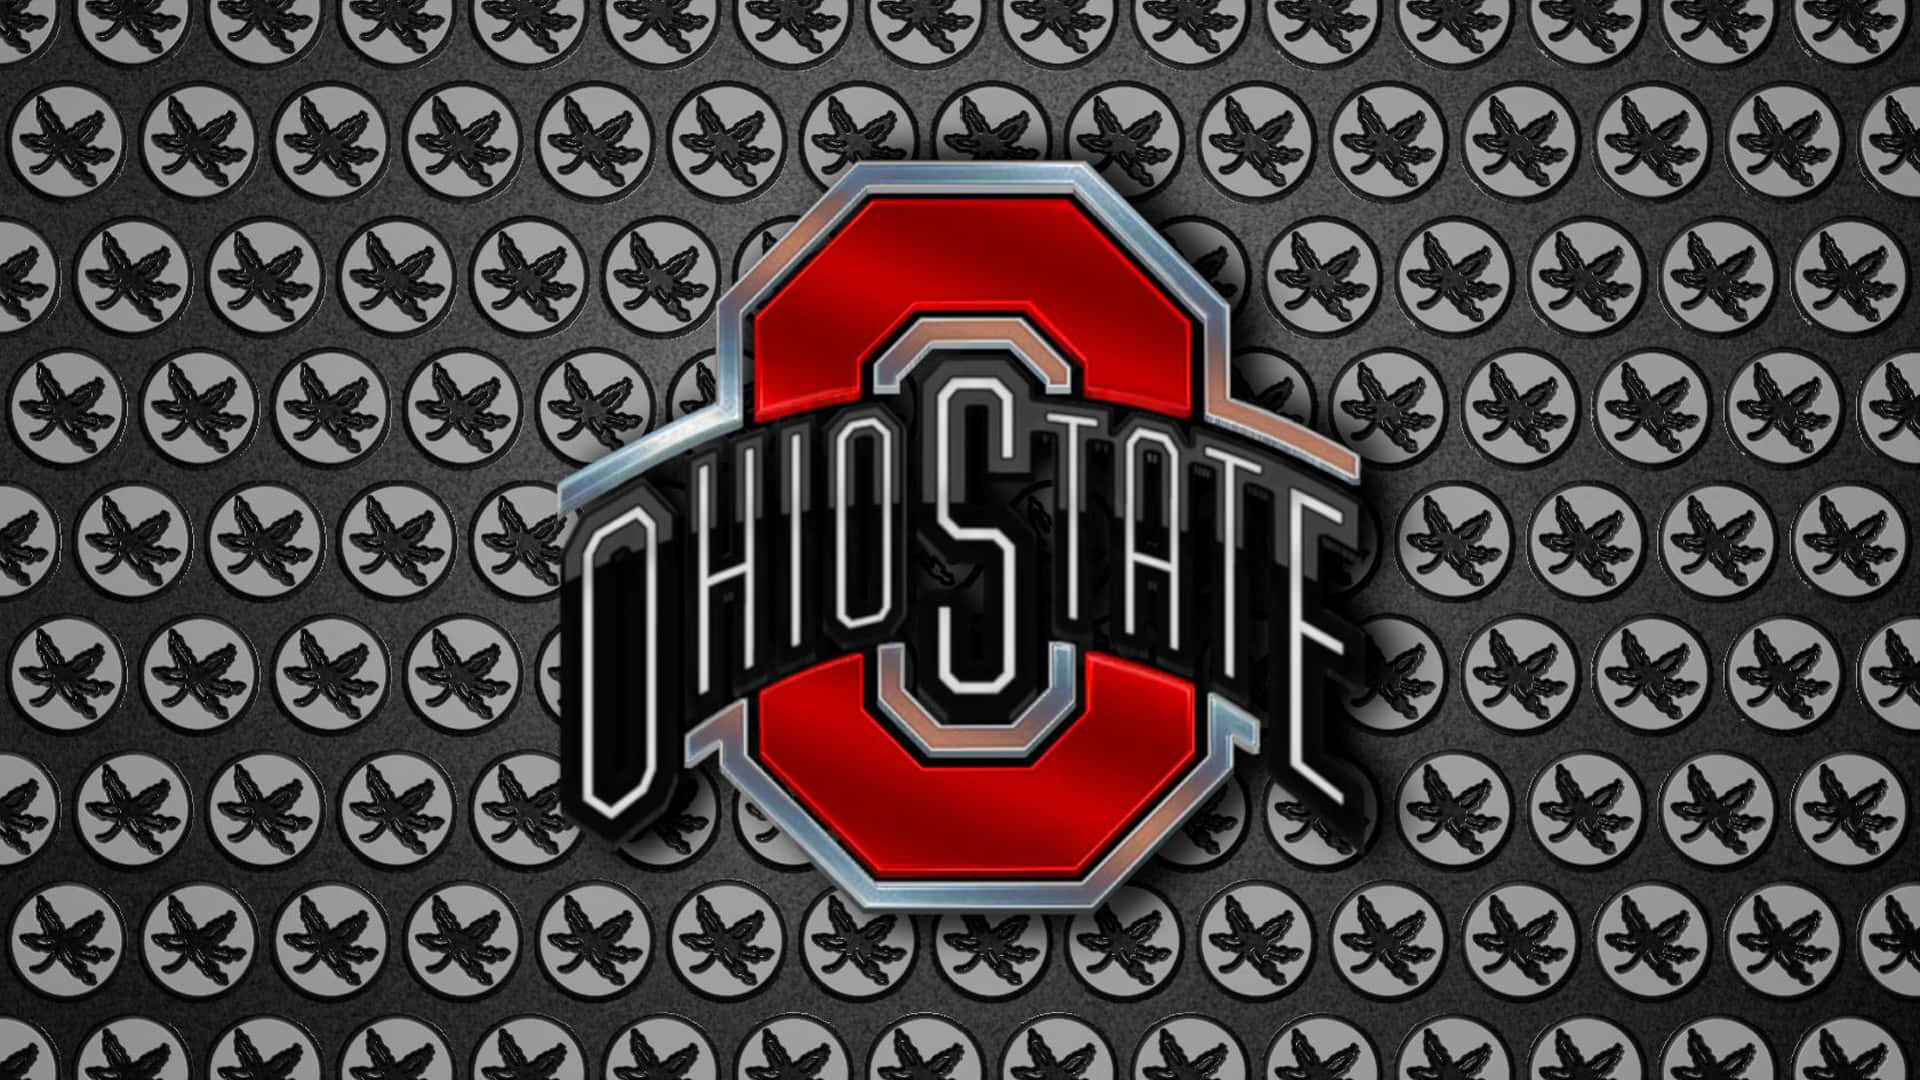 The amazing Tower of Ohio State! Wallpaper